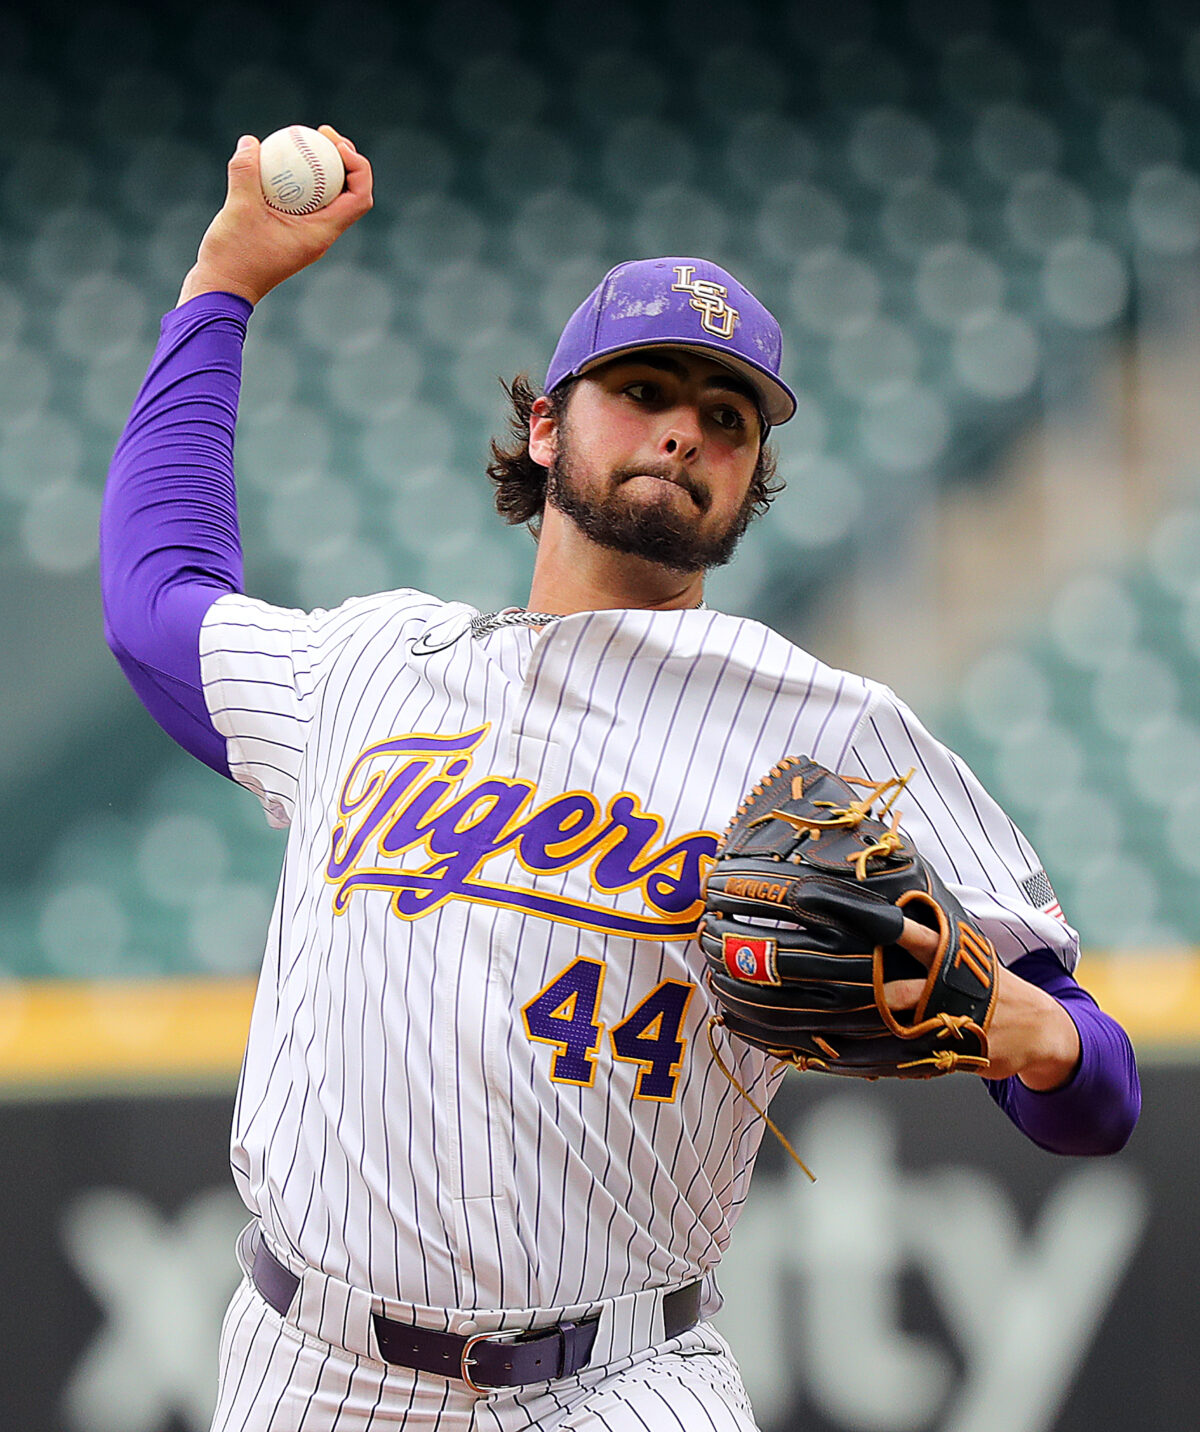 LSU baseball overcomes late deficit to sneak by Bethune-Cookman in Game 1 on Friday